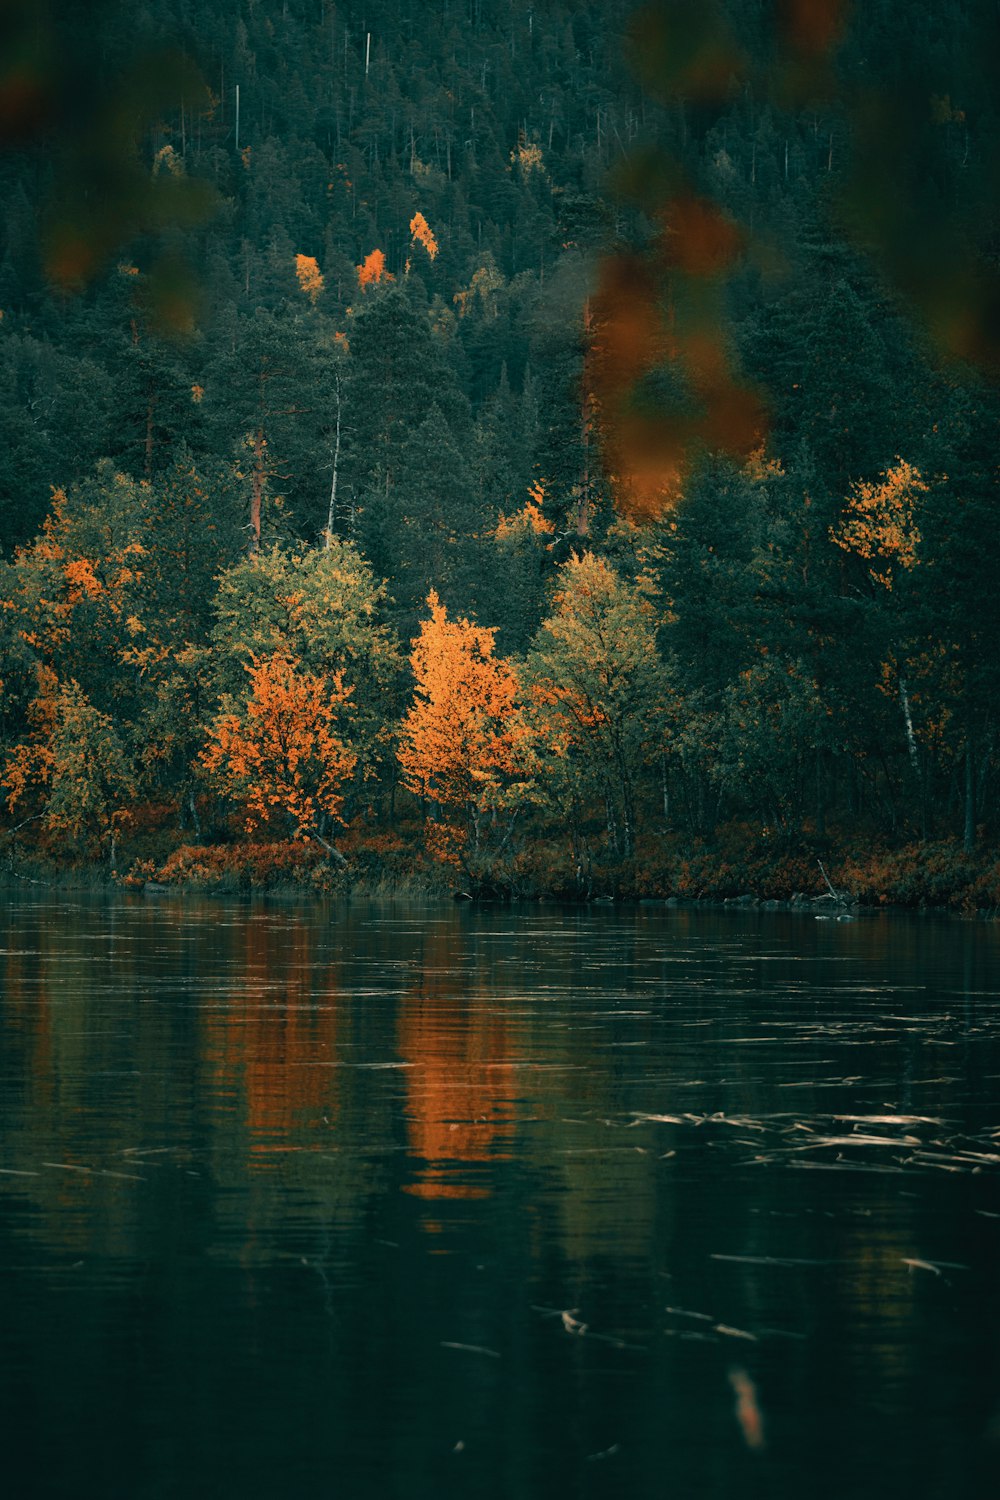 a body of water surrounded by trees with orange leaves